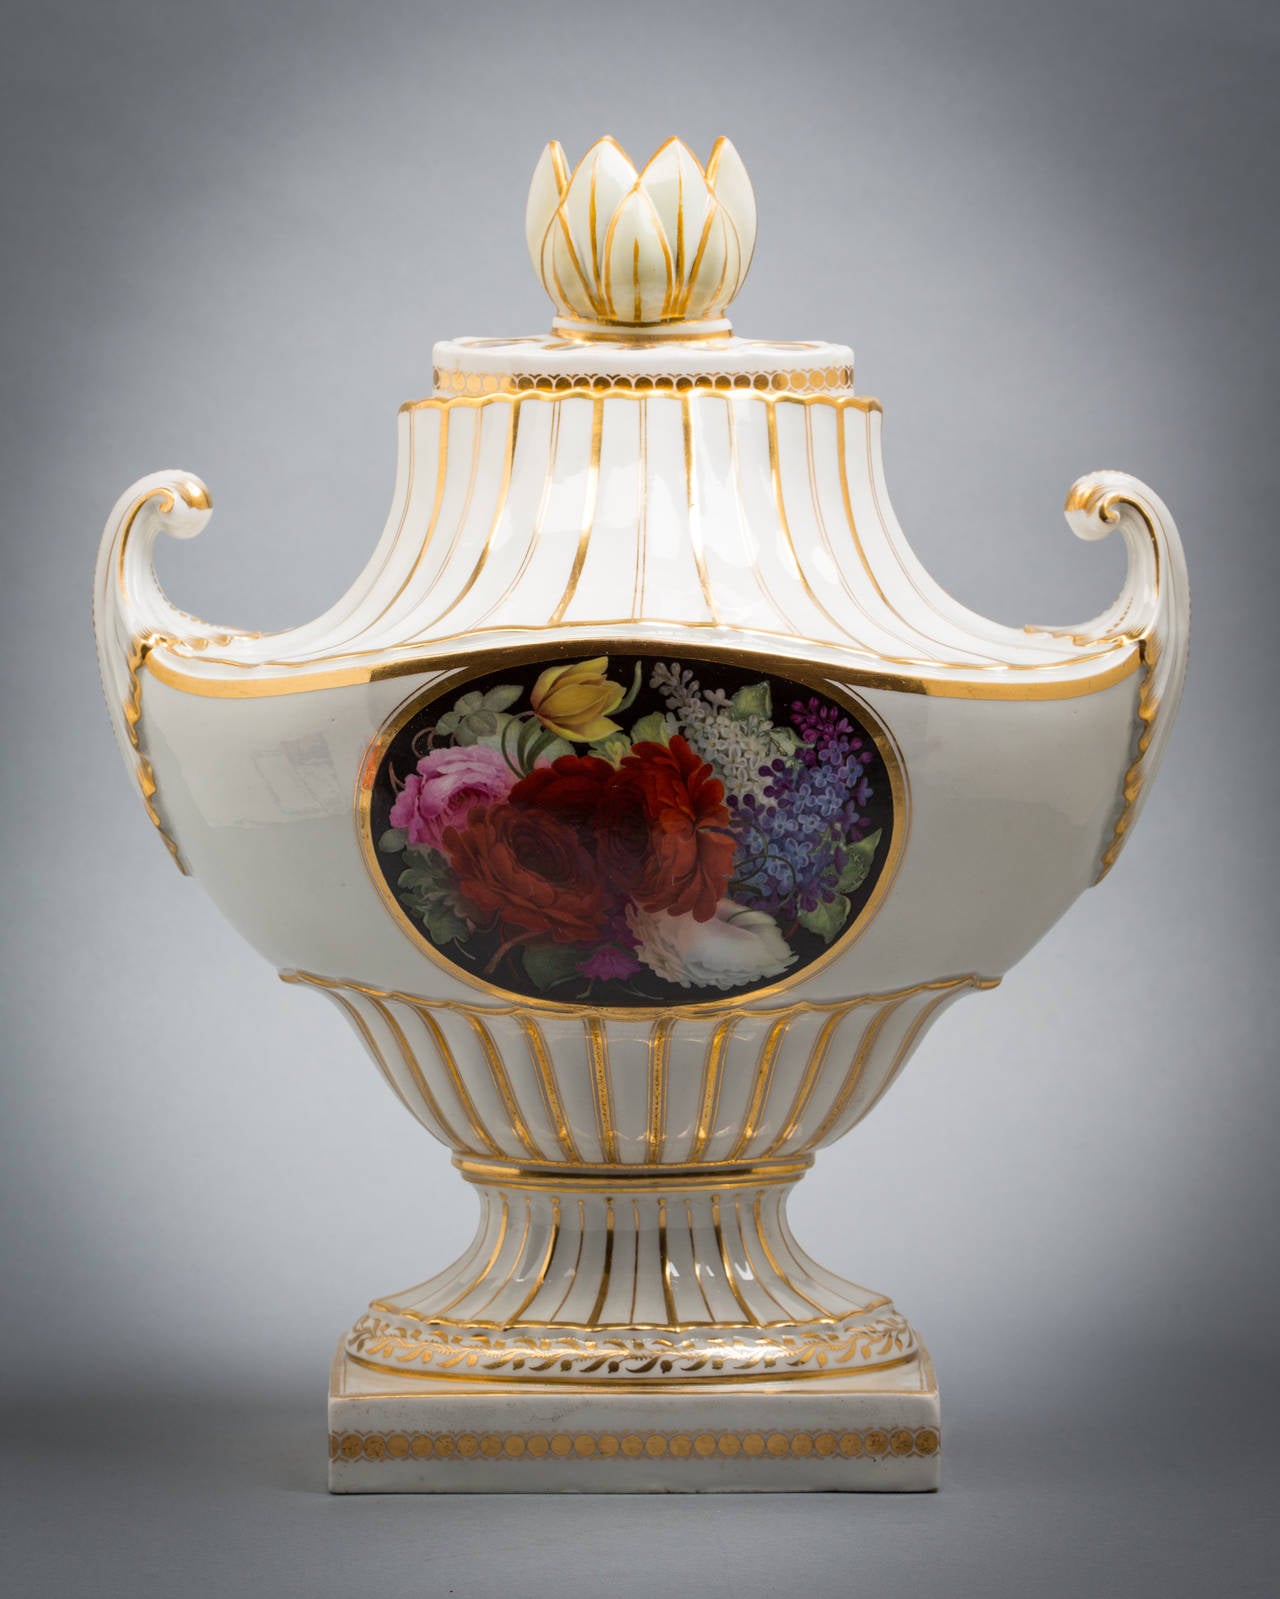 Rare English porcelain pistol-handled flight and barr covered vase, circa 1800.

Decorated on both sides with a floral bouquet. One one a aqua-blue ground (daytime) and on the other side on a black ground (nighttime). Inscribed on the base a puce